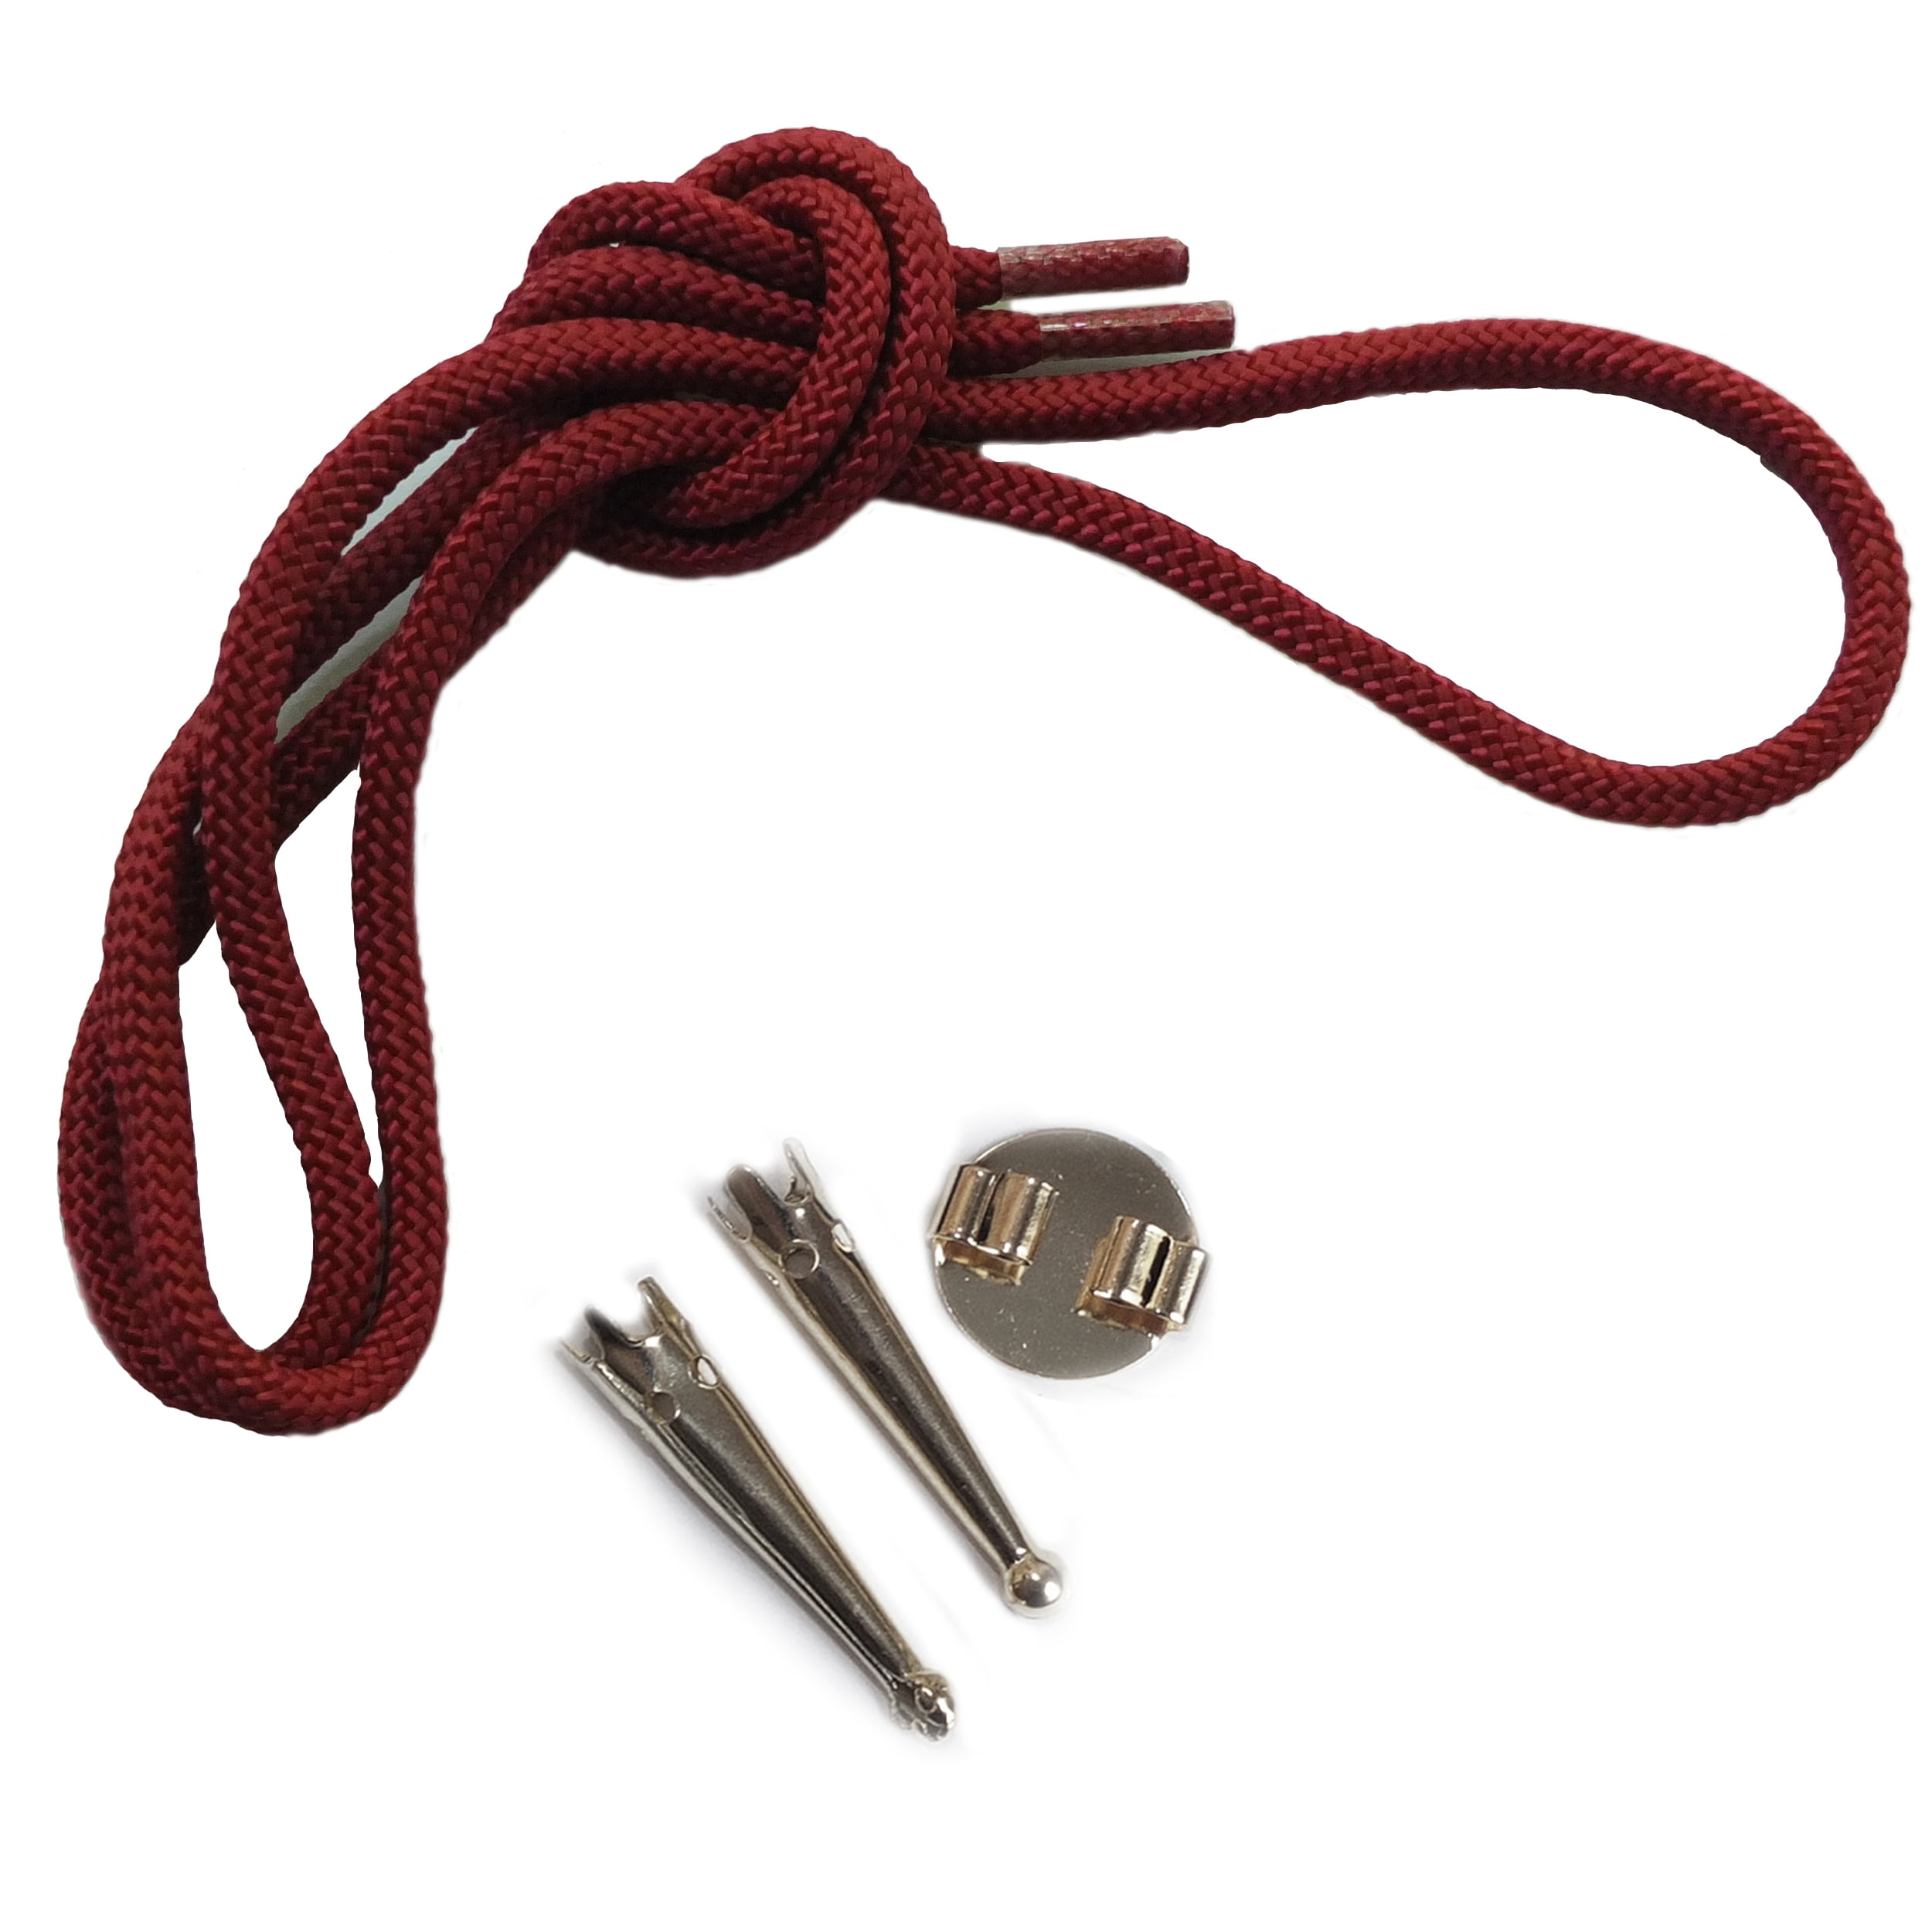 Blank Bolo String Tie Parts Kit Round Slide Smooth Tips Wine Maroon Cord  DIY Silver Tone Supplies fo 